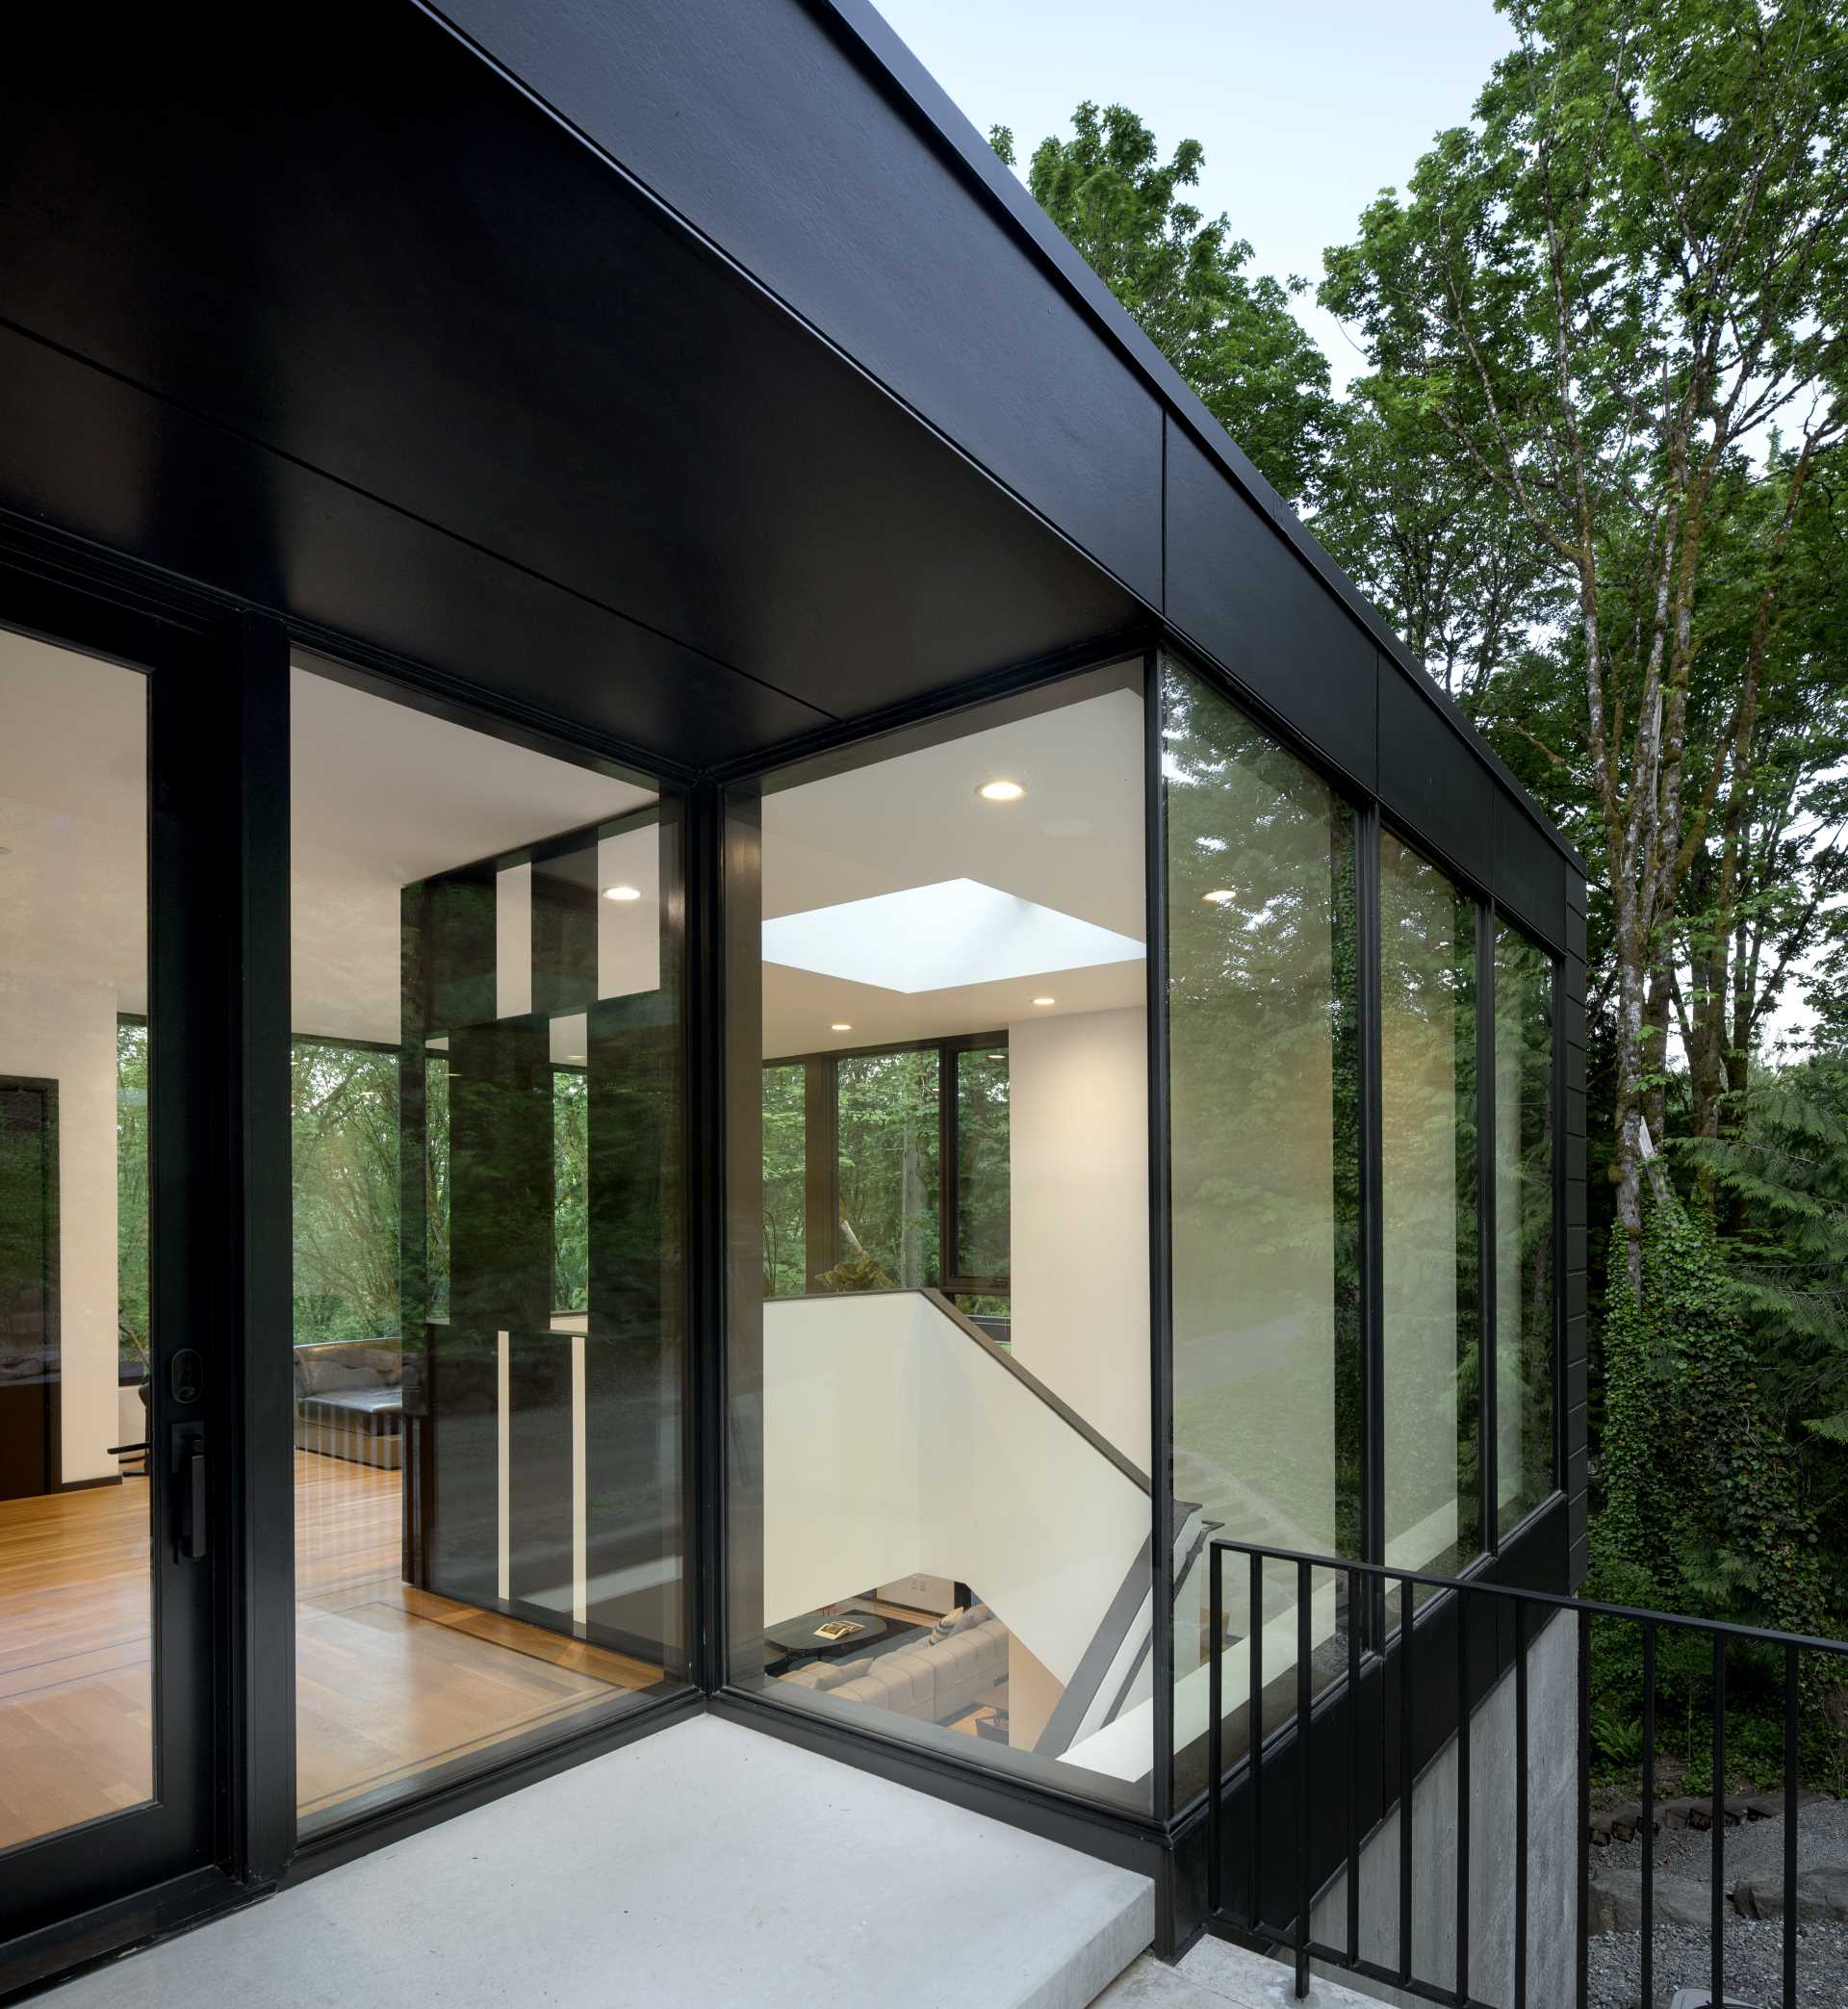 A modern black house with floor-to-ceiling windows and glass front door.